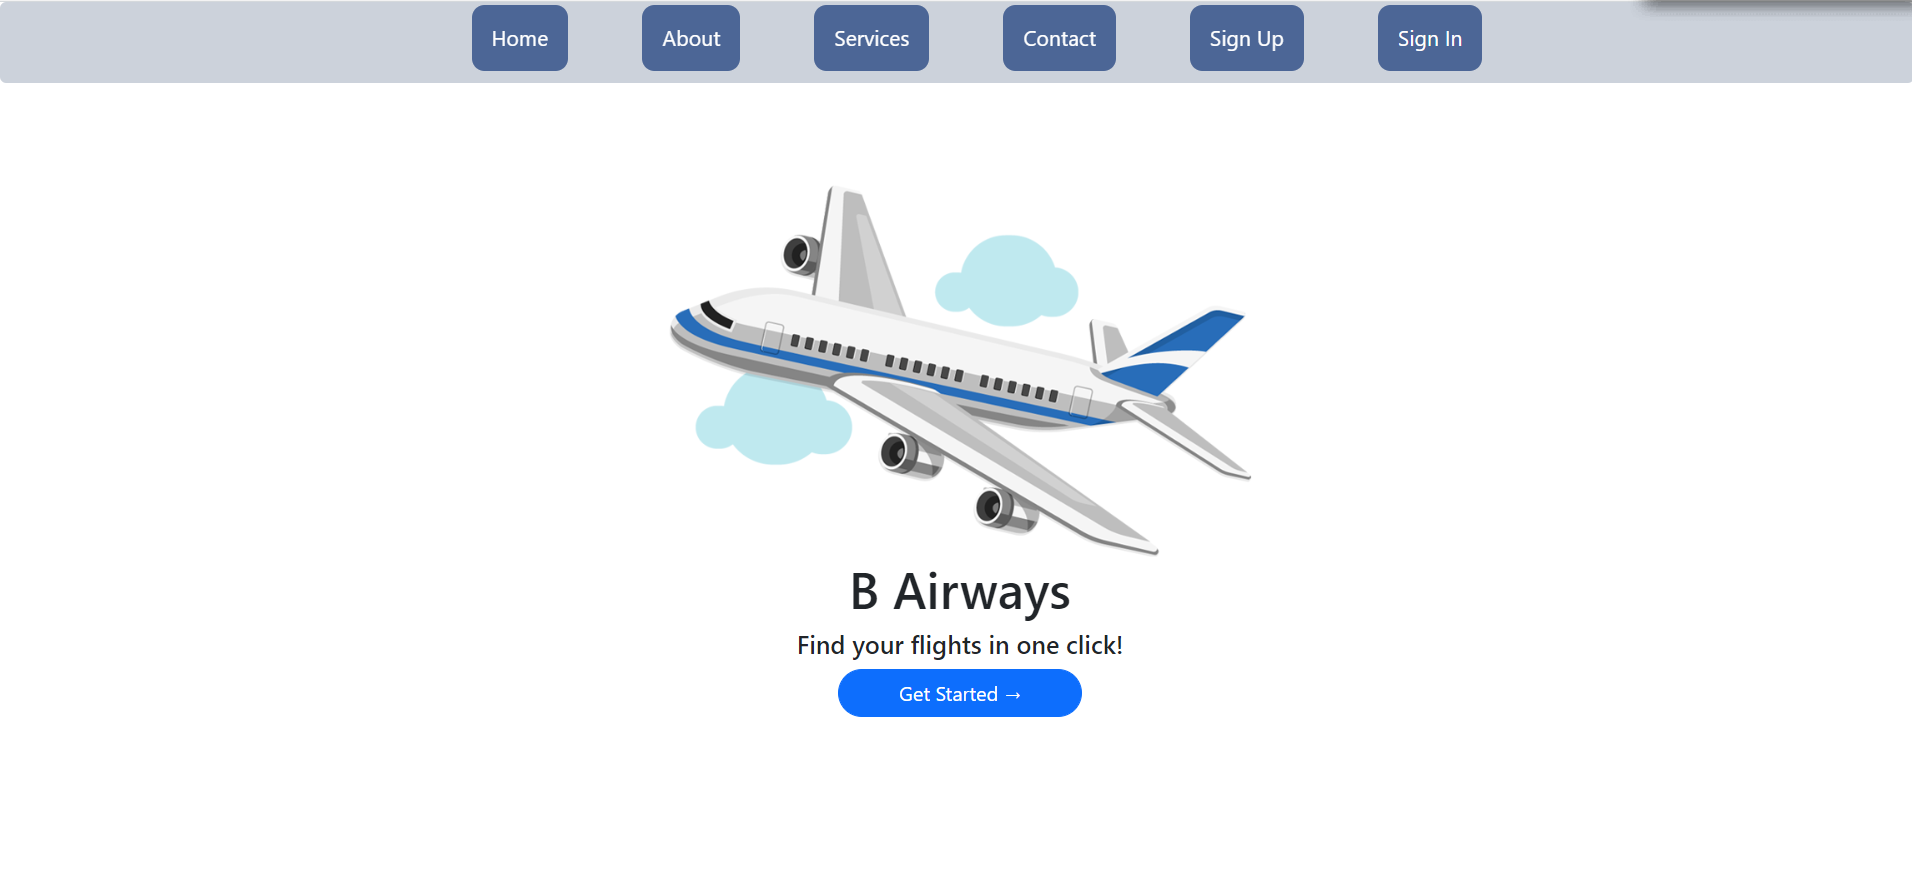 Airline Ticket/Seat Reservation System